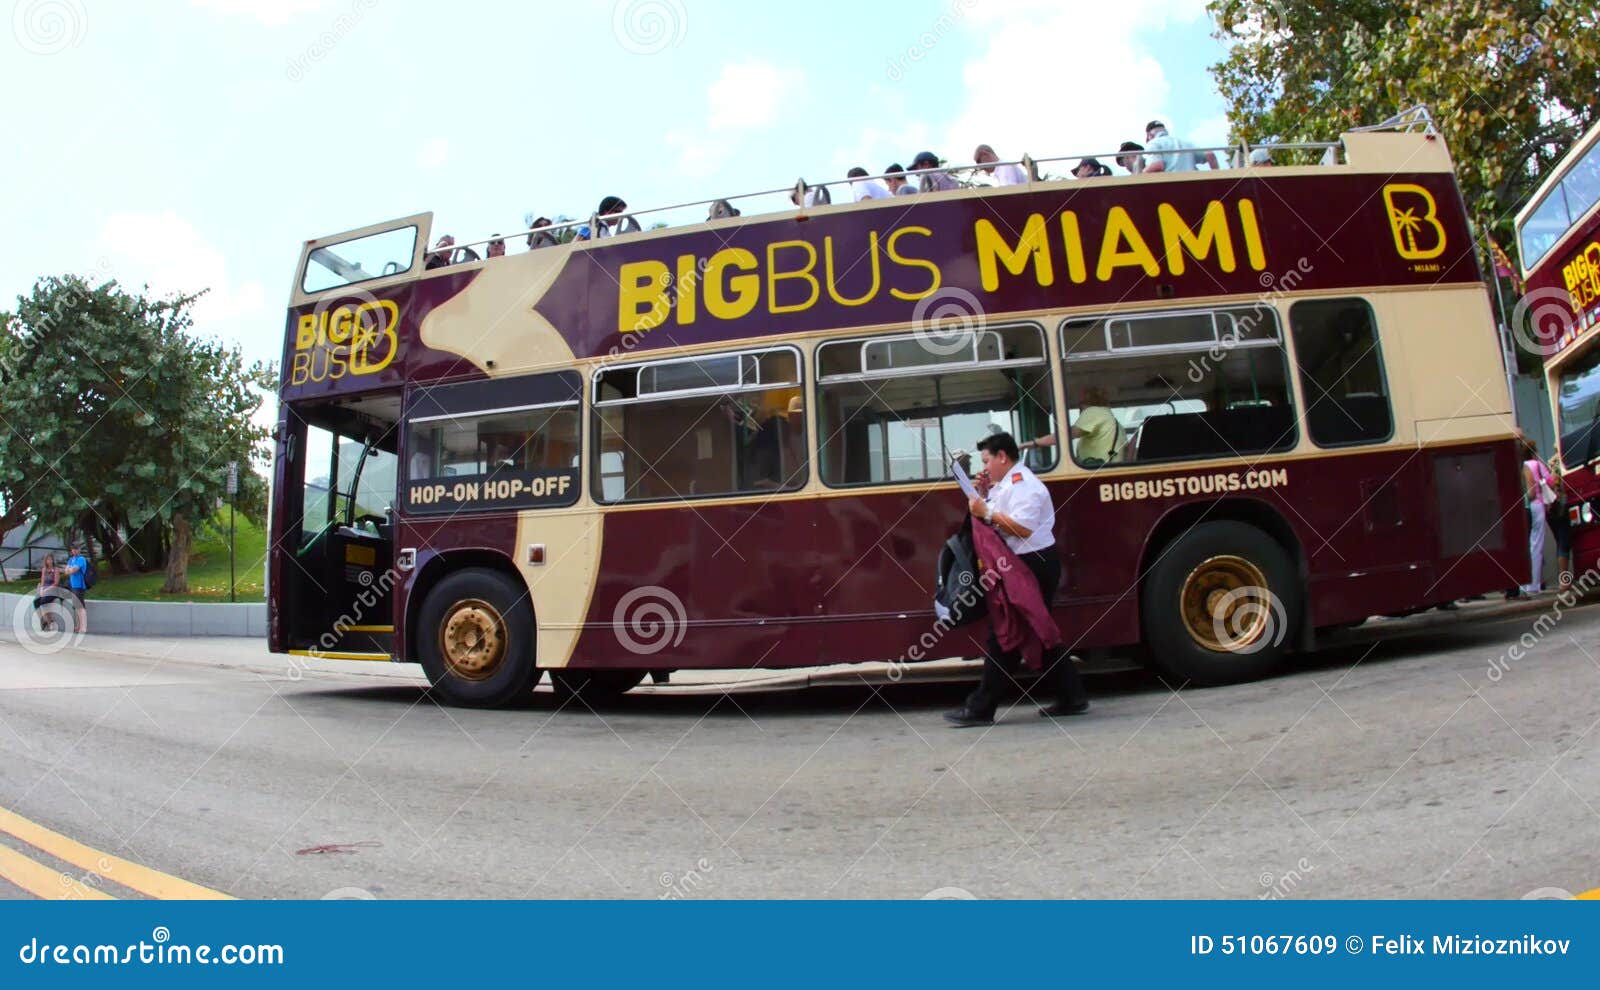 Big Bus Tours Bayside Miami FL Stock Video - Video of rate, hidef: 51067609